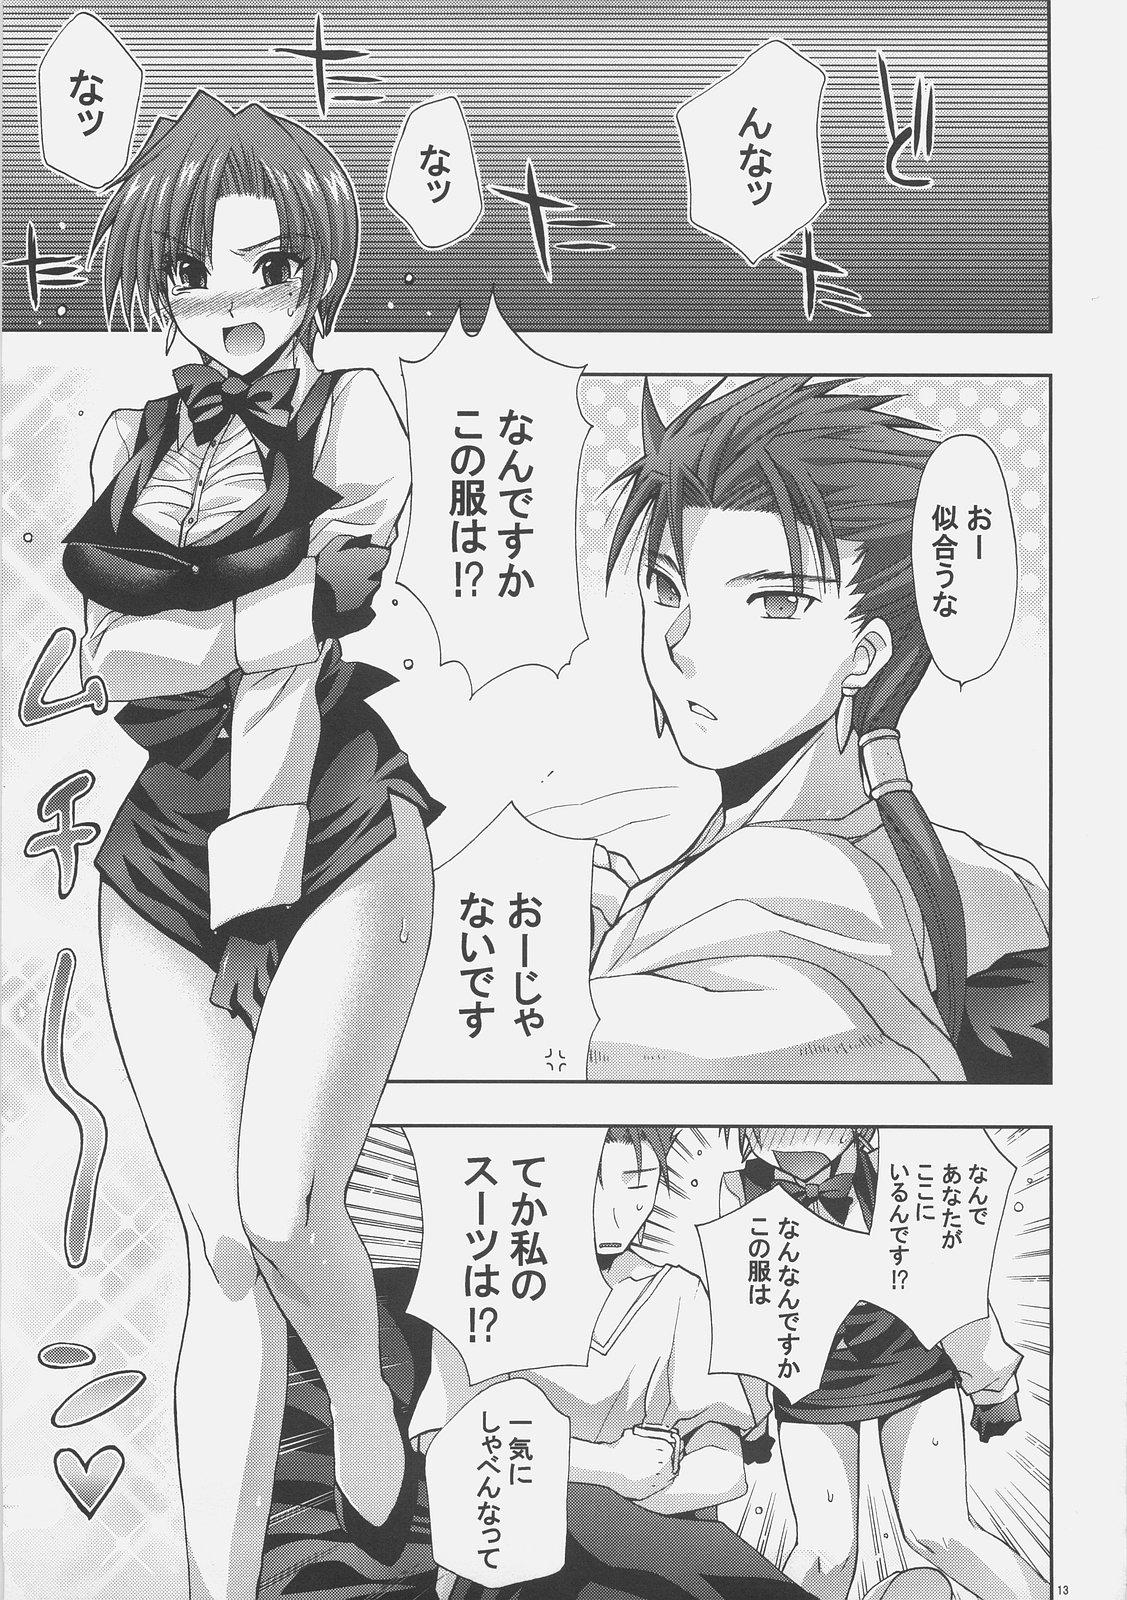 Coroa Getting Clothes - Fate hollow ataraxia Girl On Girl - Page 12